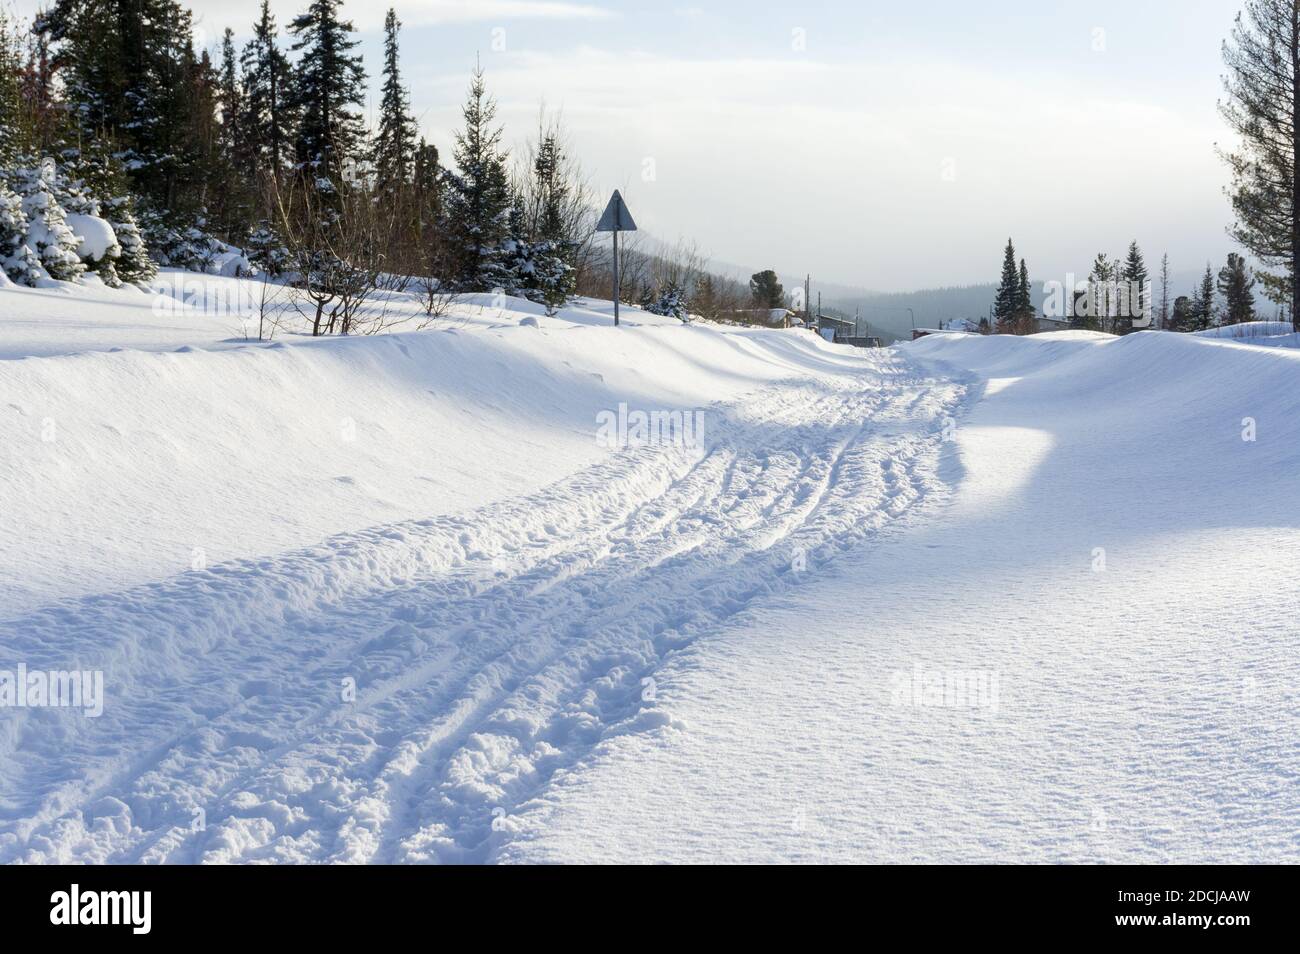 Snow-covered rural road leads to the village among the coniferous forest. Stock Photo